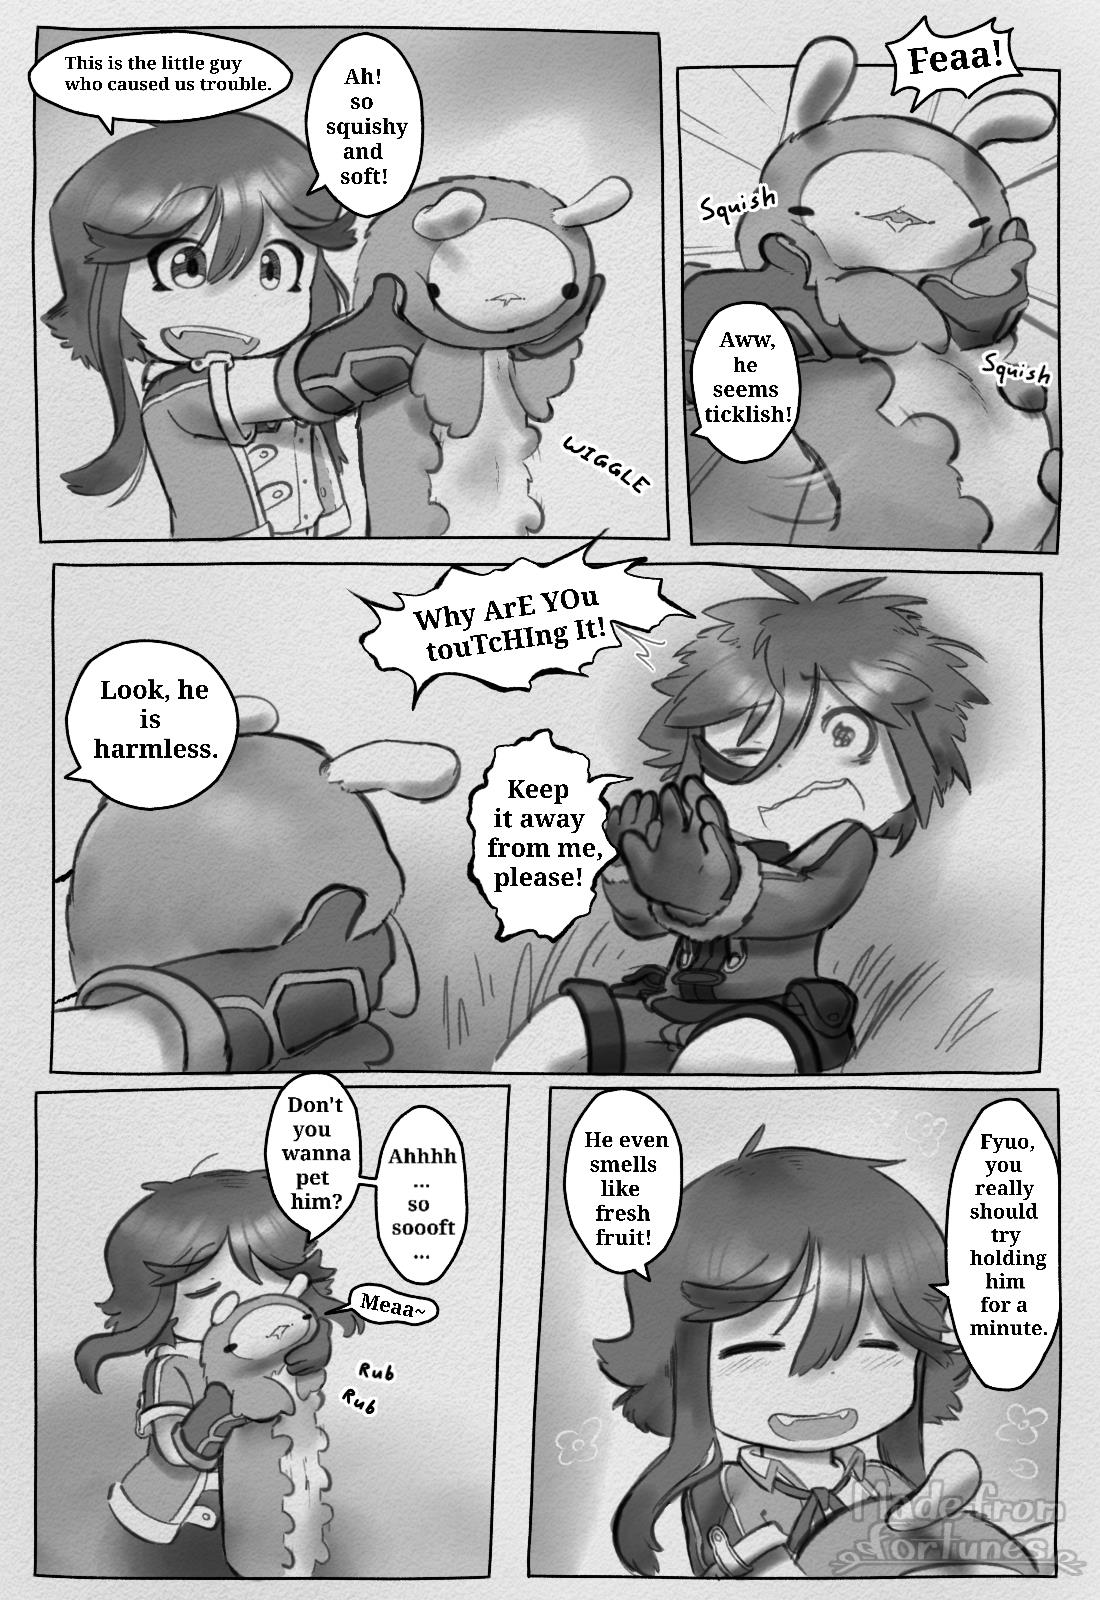 Made From Fortunes (Made In Abyss Fanmade Comic) - Page 4